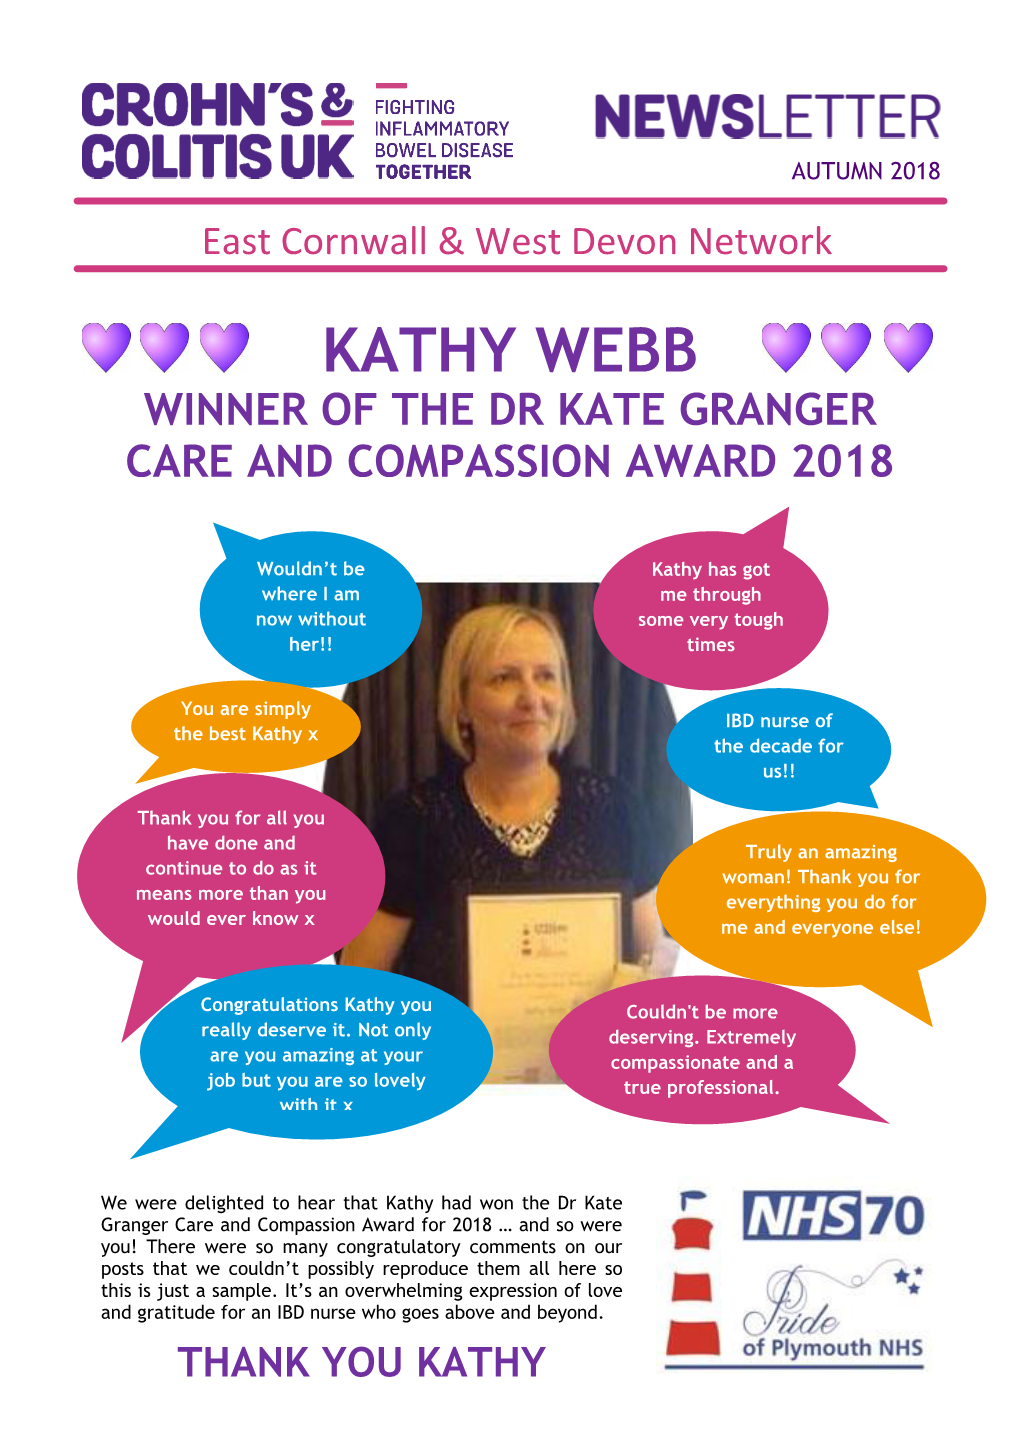 Kathy Webb Winner of the Dr Kate Granger Care and Compassion Award 2018